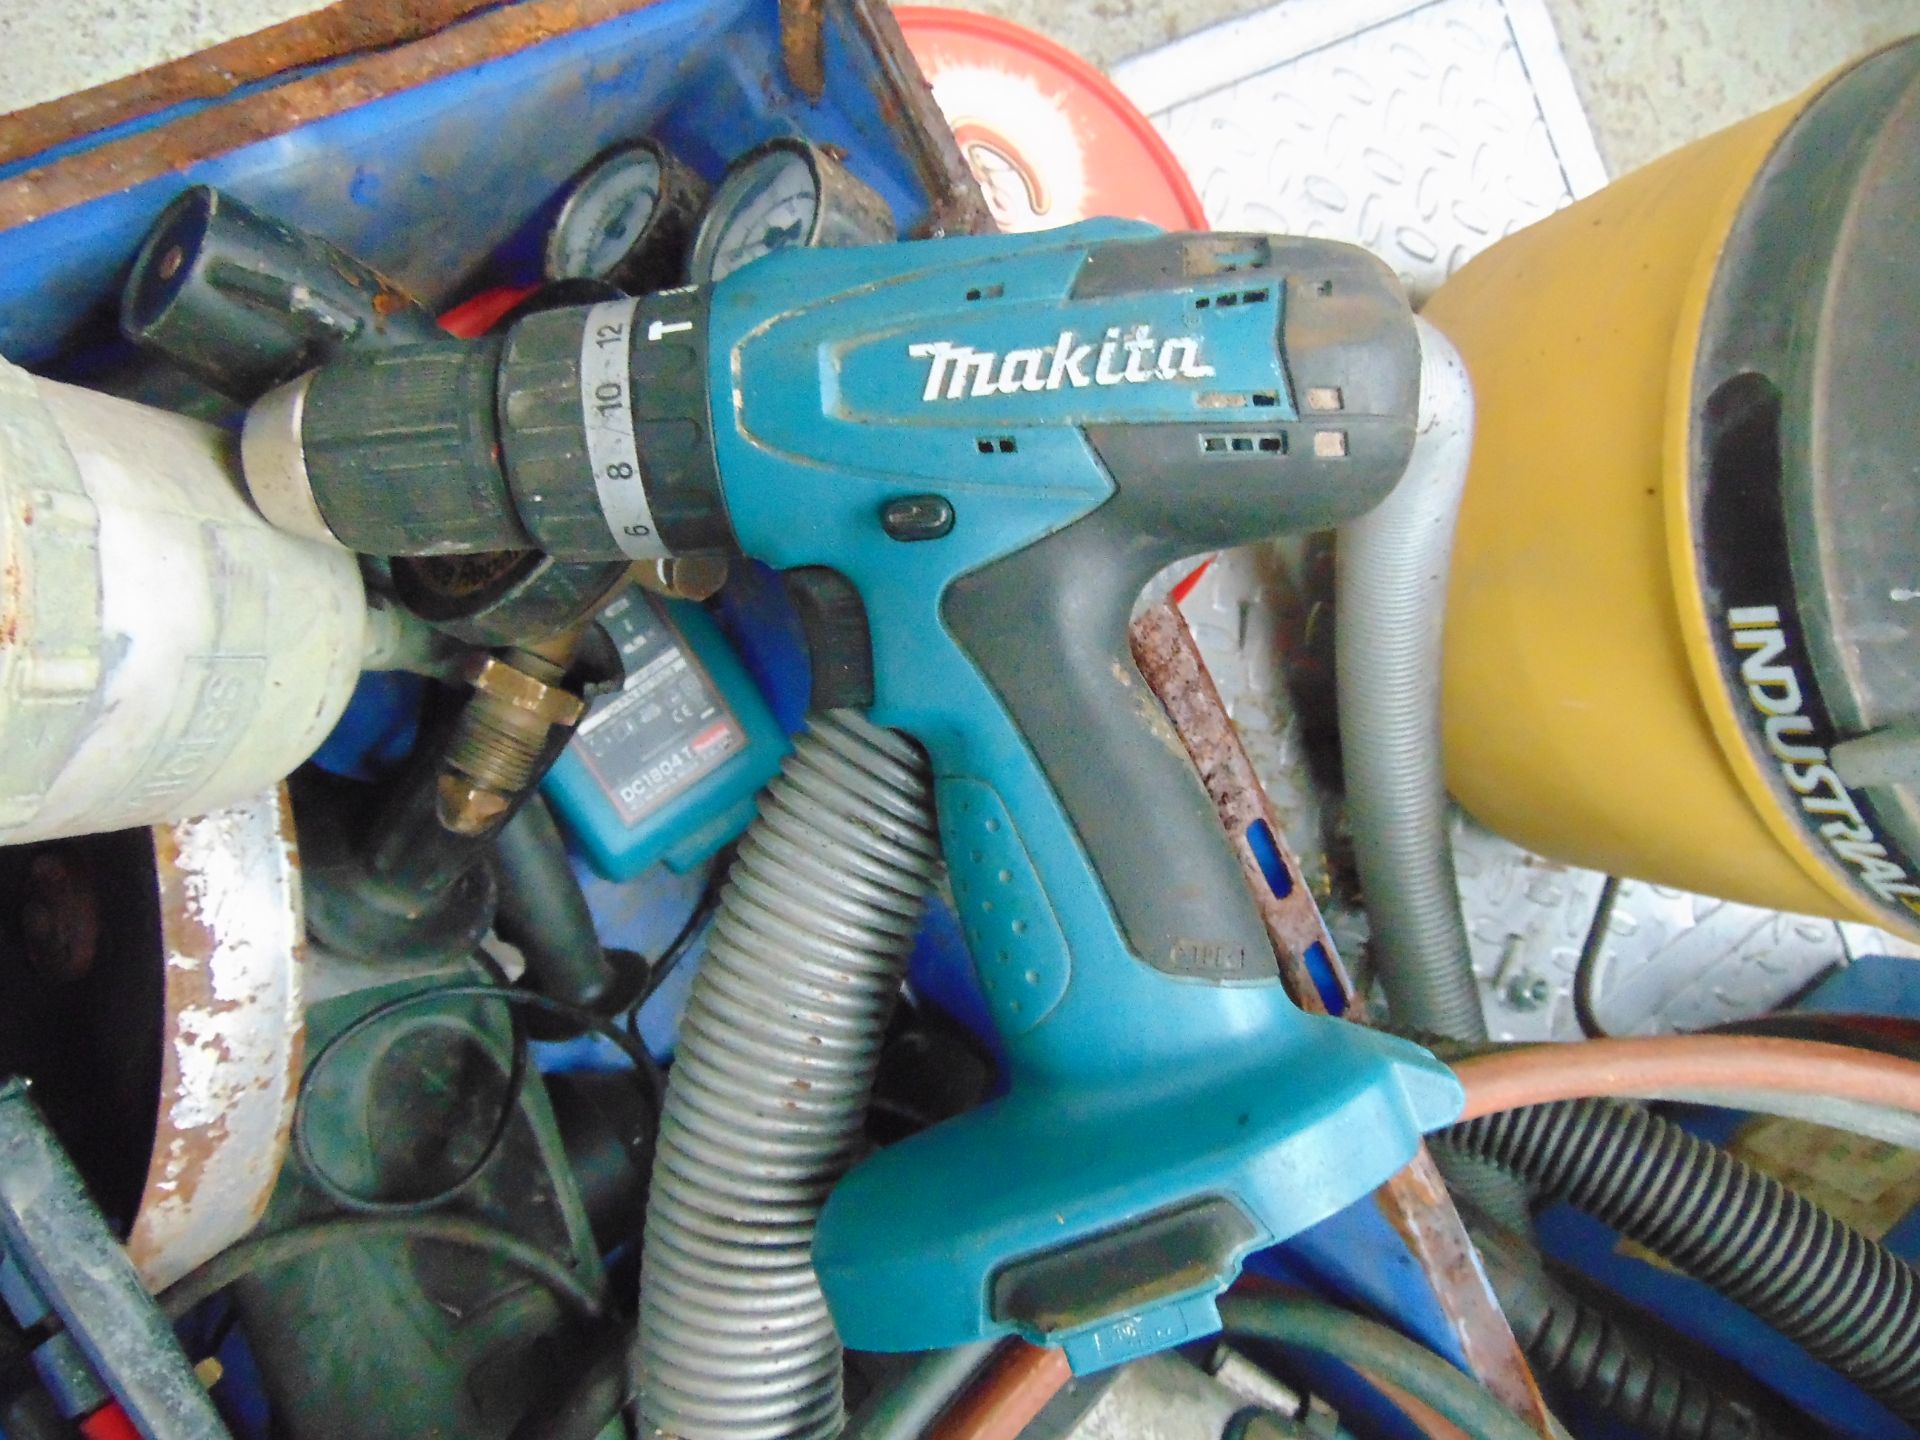 Steel platform x2 vacuums- x2 bosch drills with charger- makita buzz gun with charger- 9" Grinder - Image 5 of 8